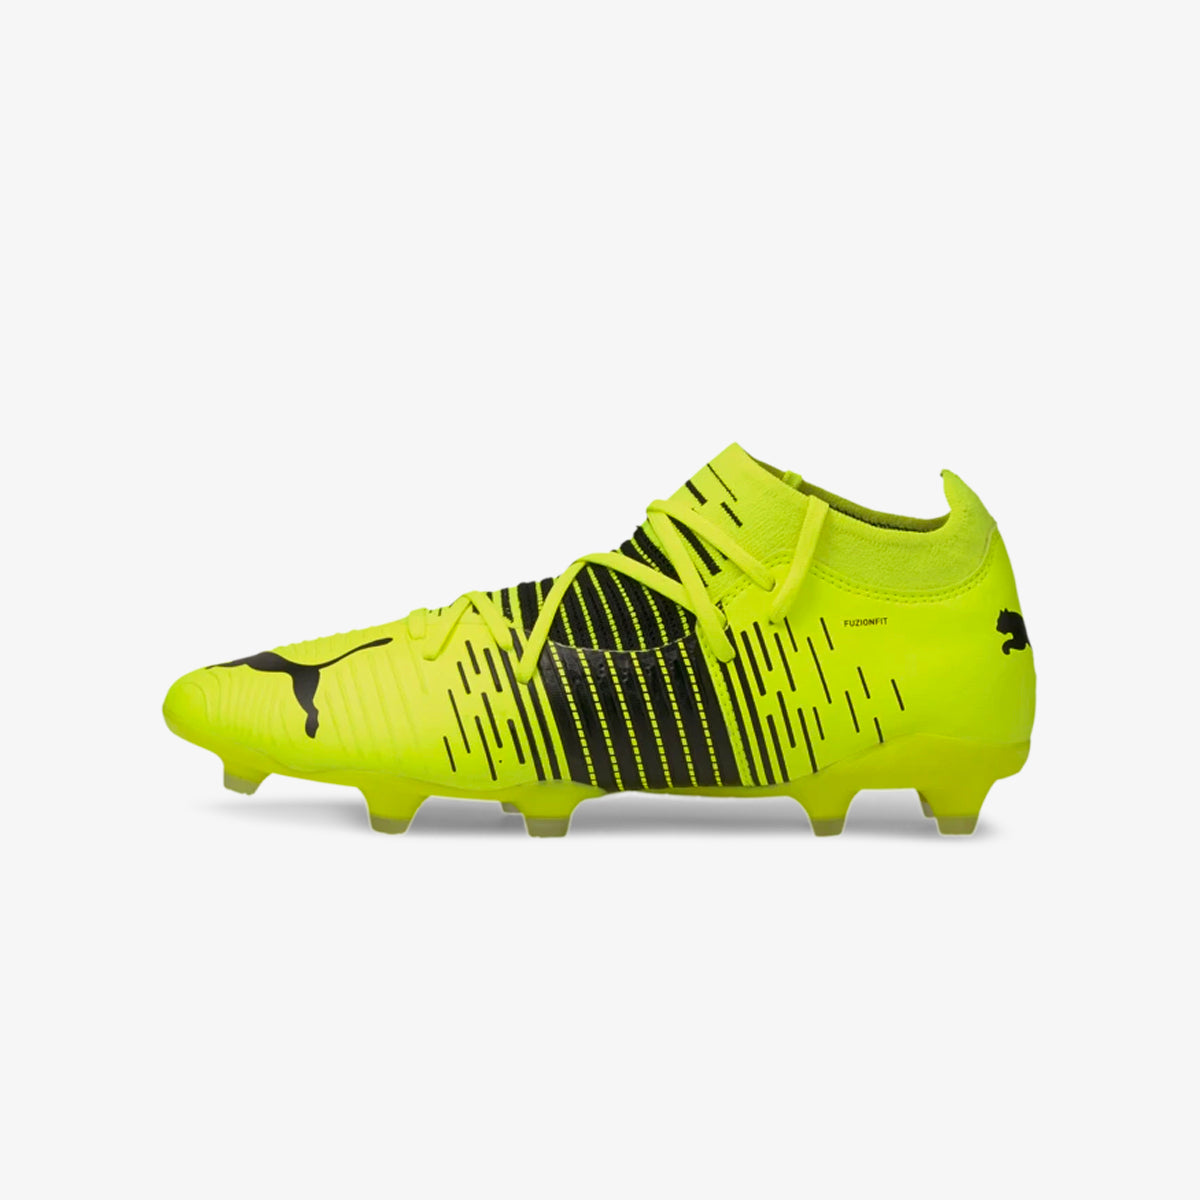 Future Z 3.1 Firmground Soccer Shoes